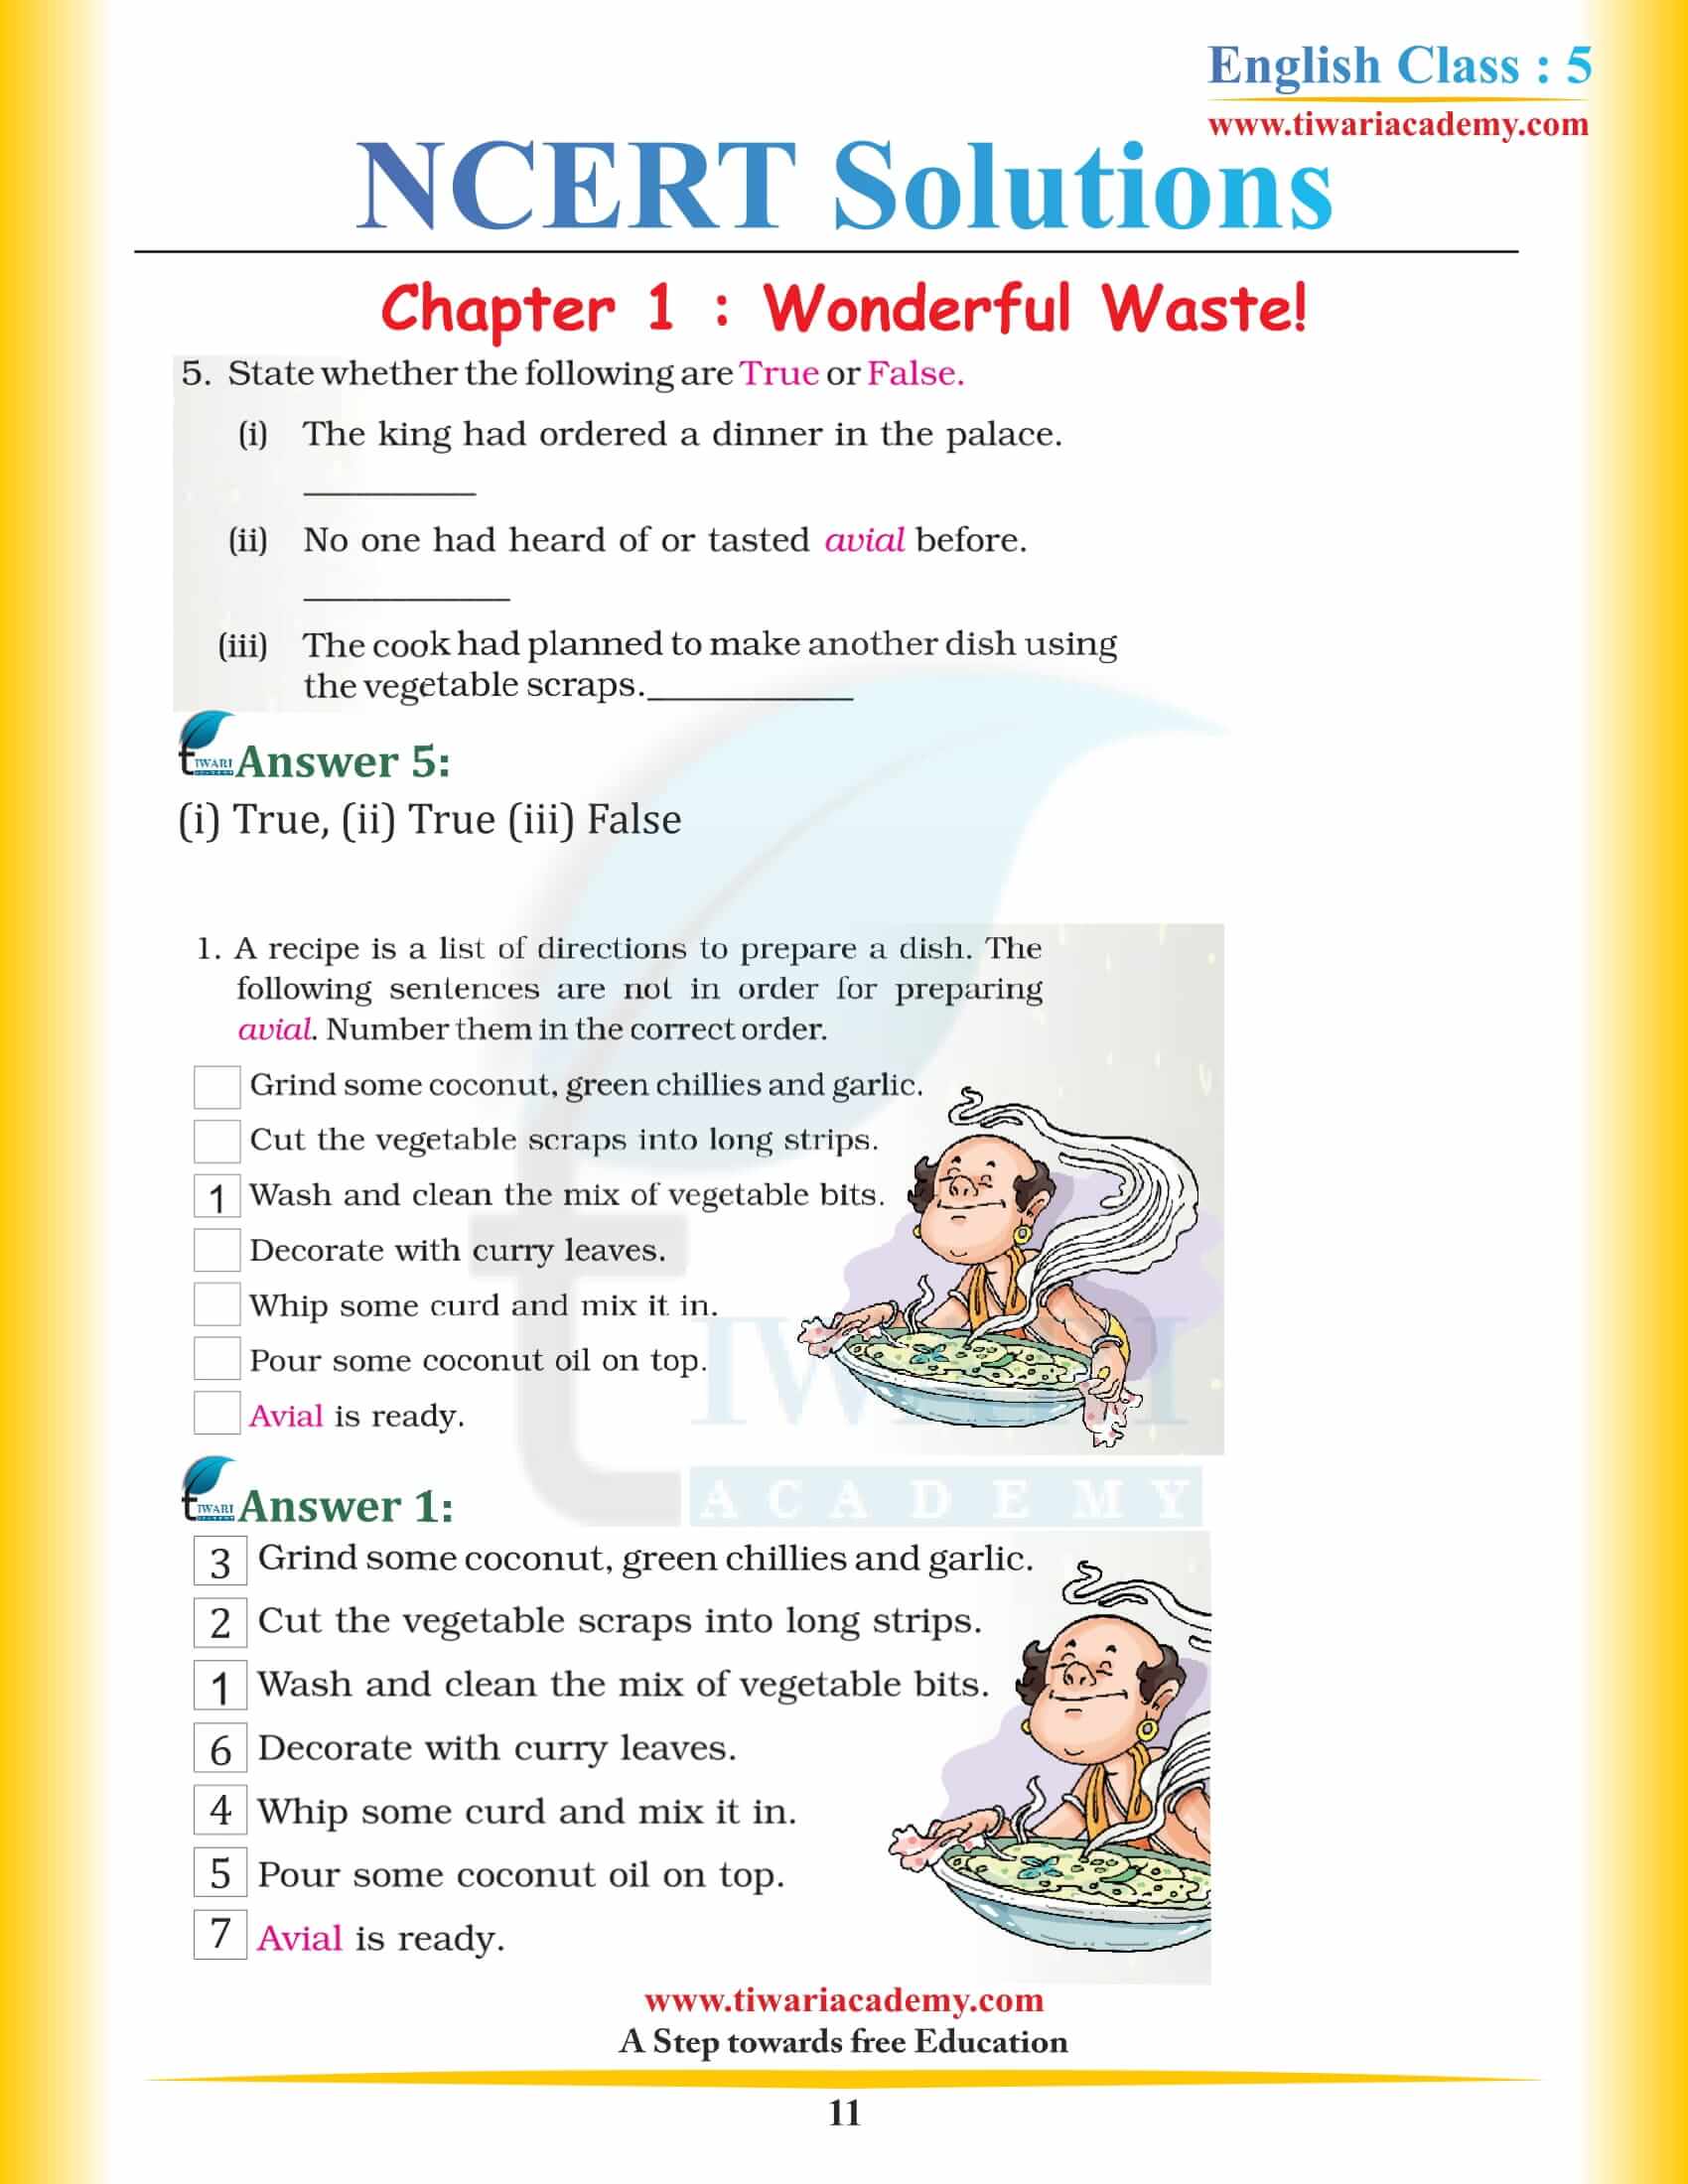 NCERT Solutions for Class 5 English Chapter 1 Wonderful Waste answers